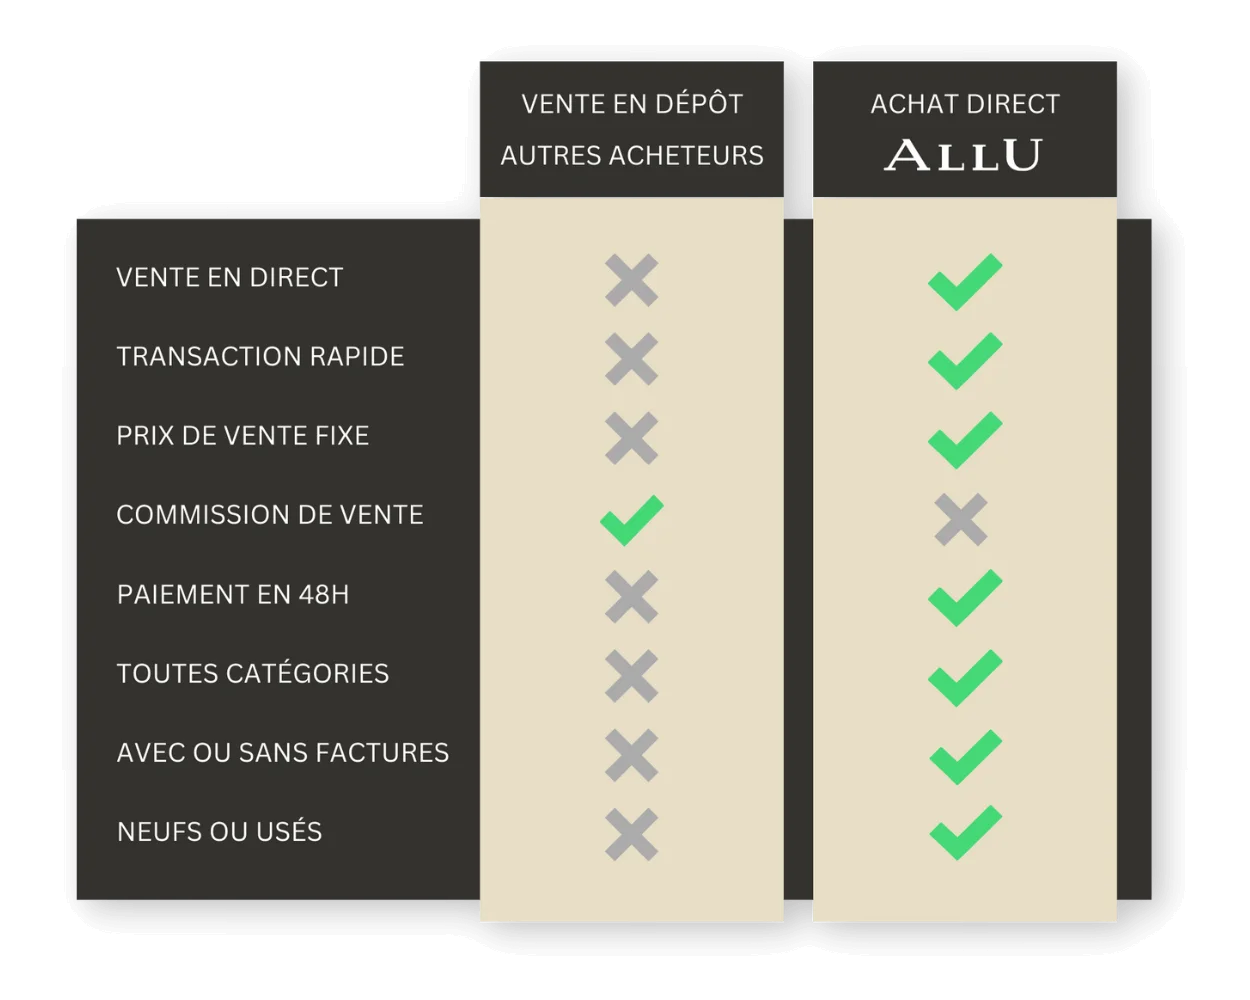 Selling luxury items at ALLU is the fastest way to declutter.